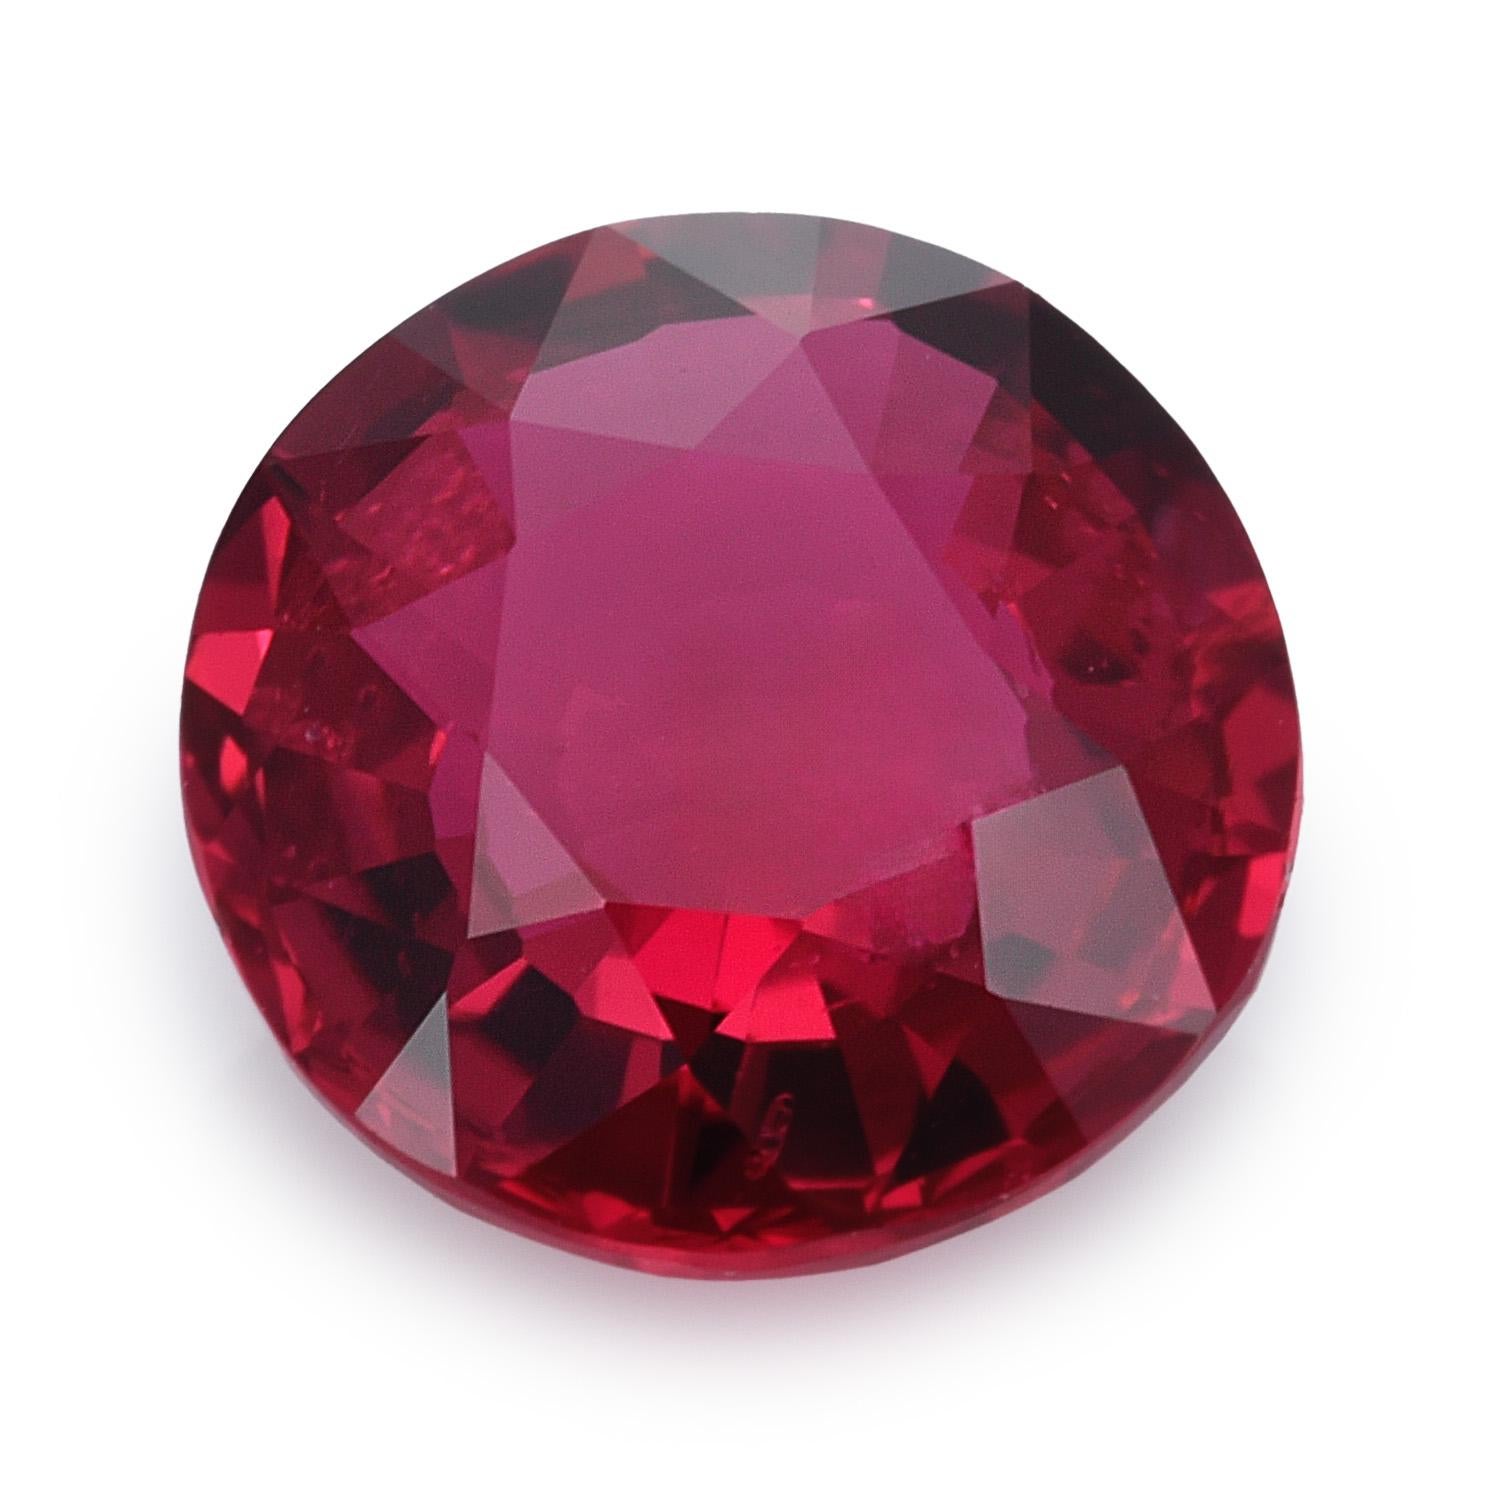 Women's or Men's GIA Certified 1.31 Carats Unheated Mozambique Ruby For Sale